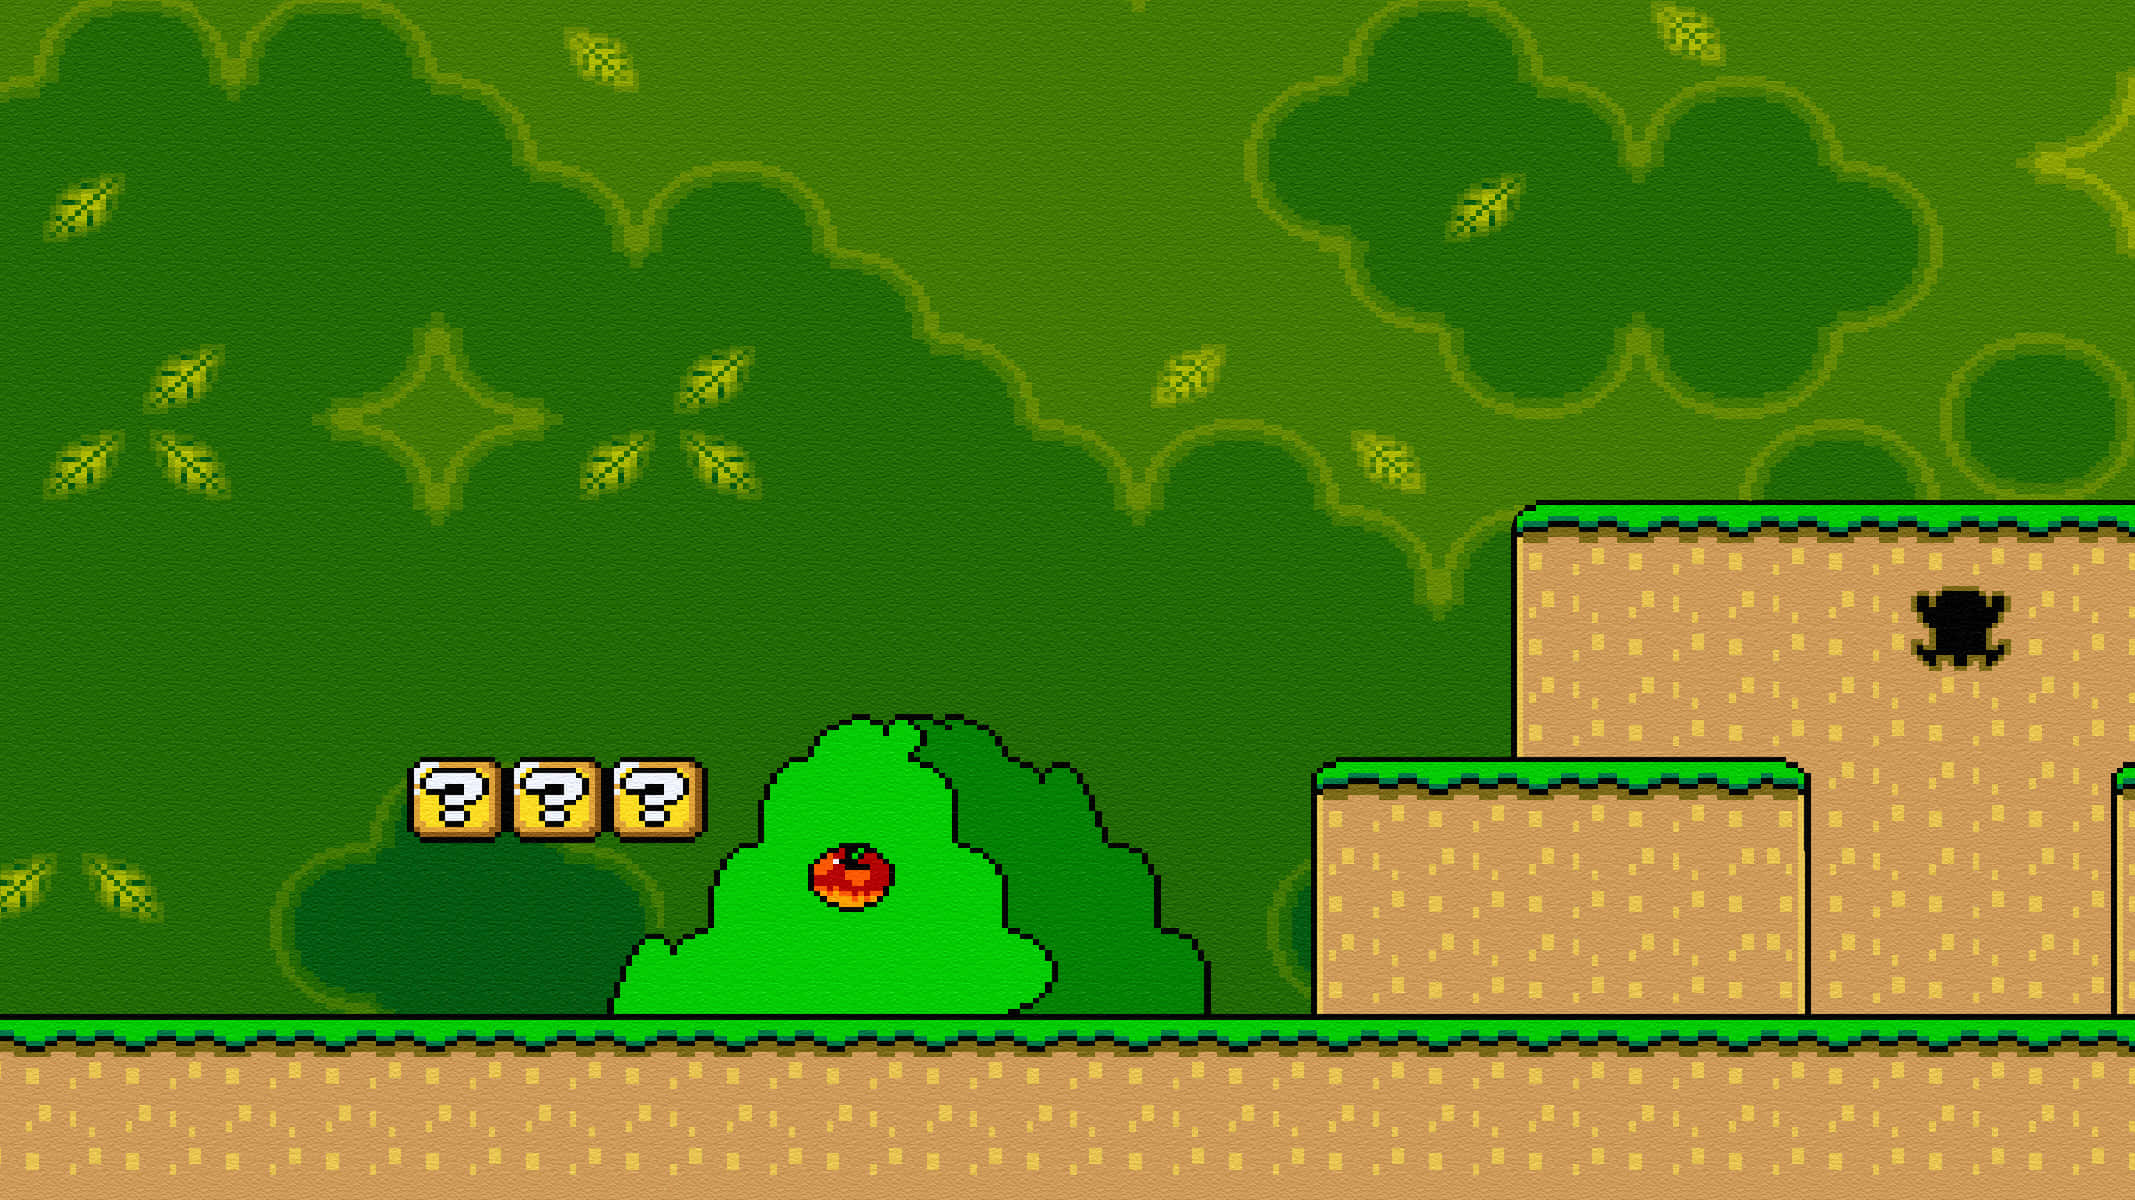 Mario and Yoshi in the colorful world of Super Mario World